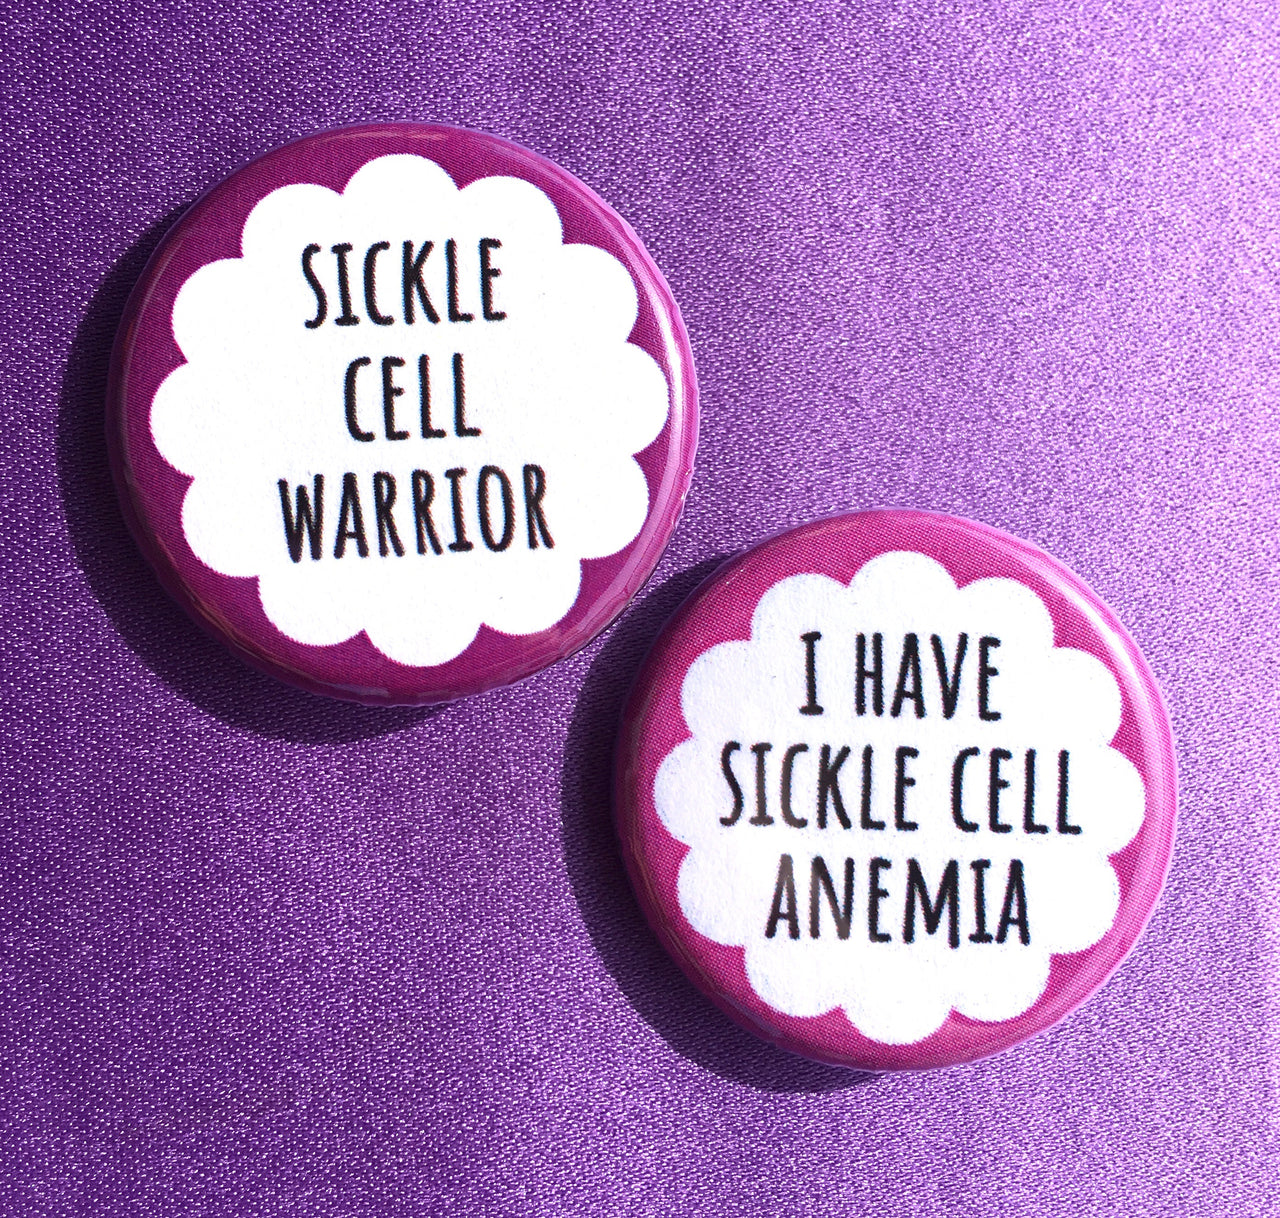 Sickle cell warrior / I have sickle cell anemia - Radical Buttons